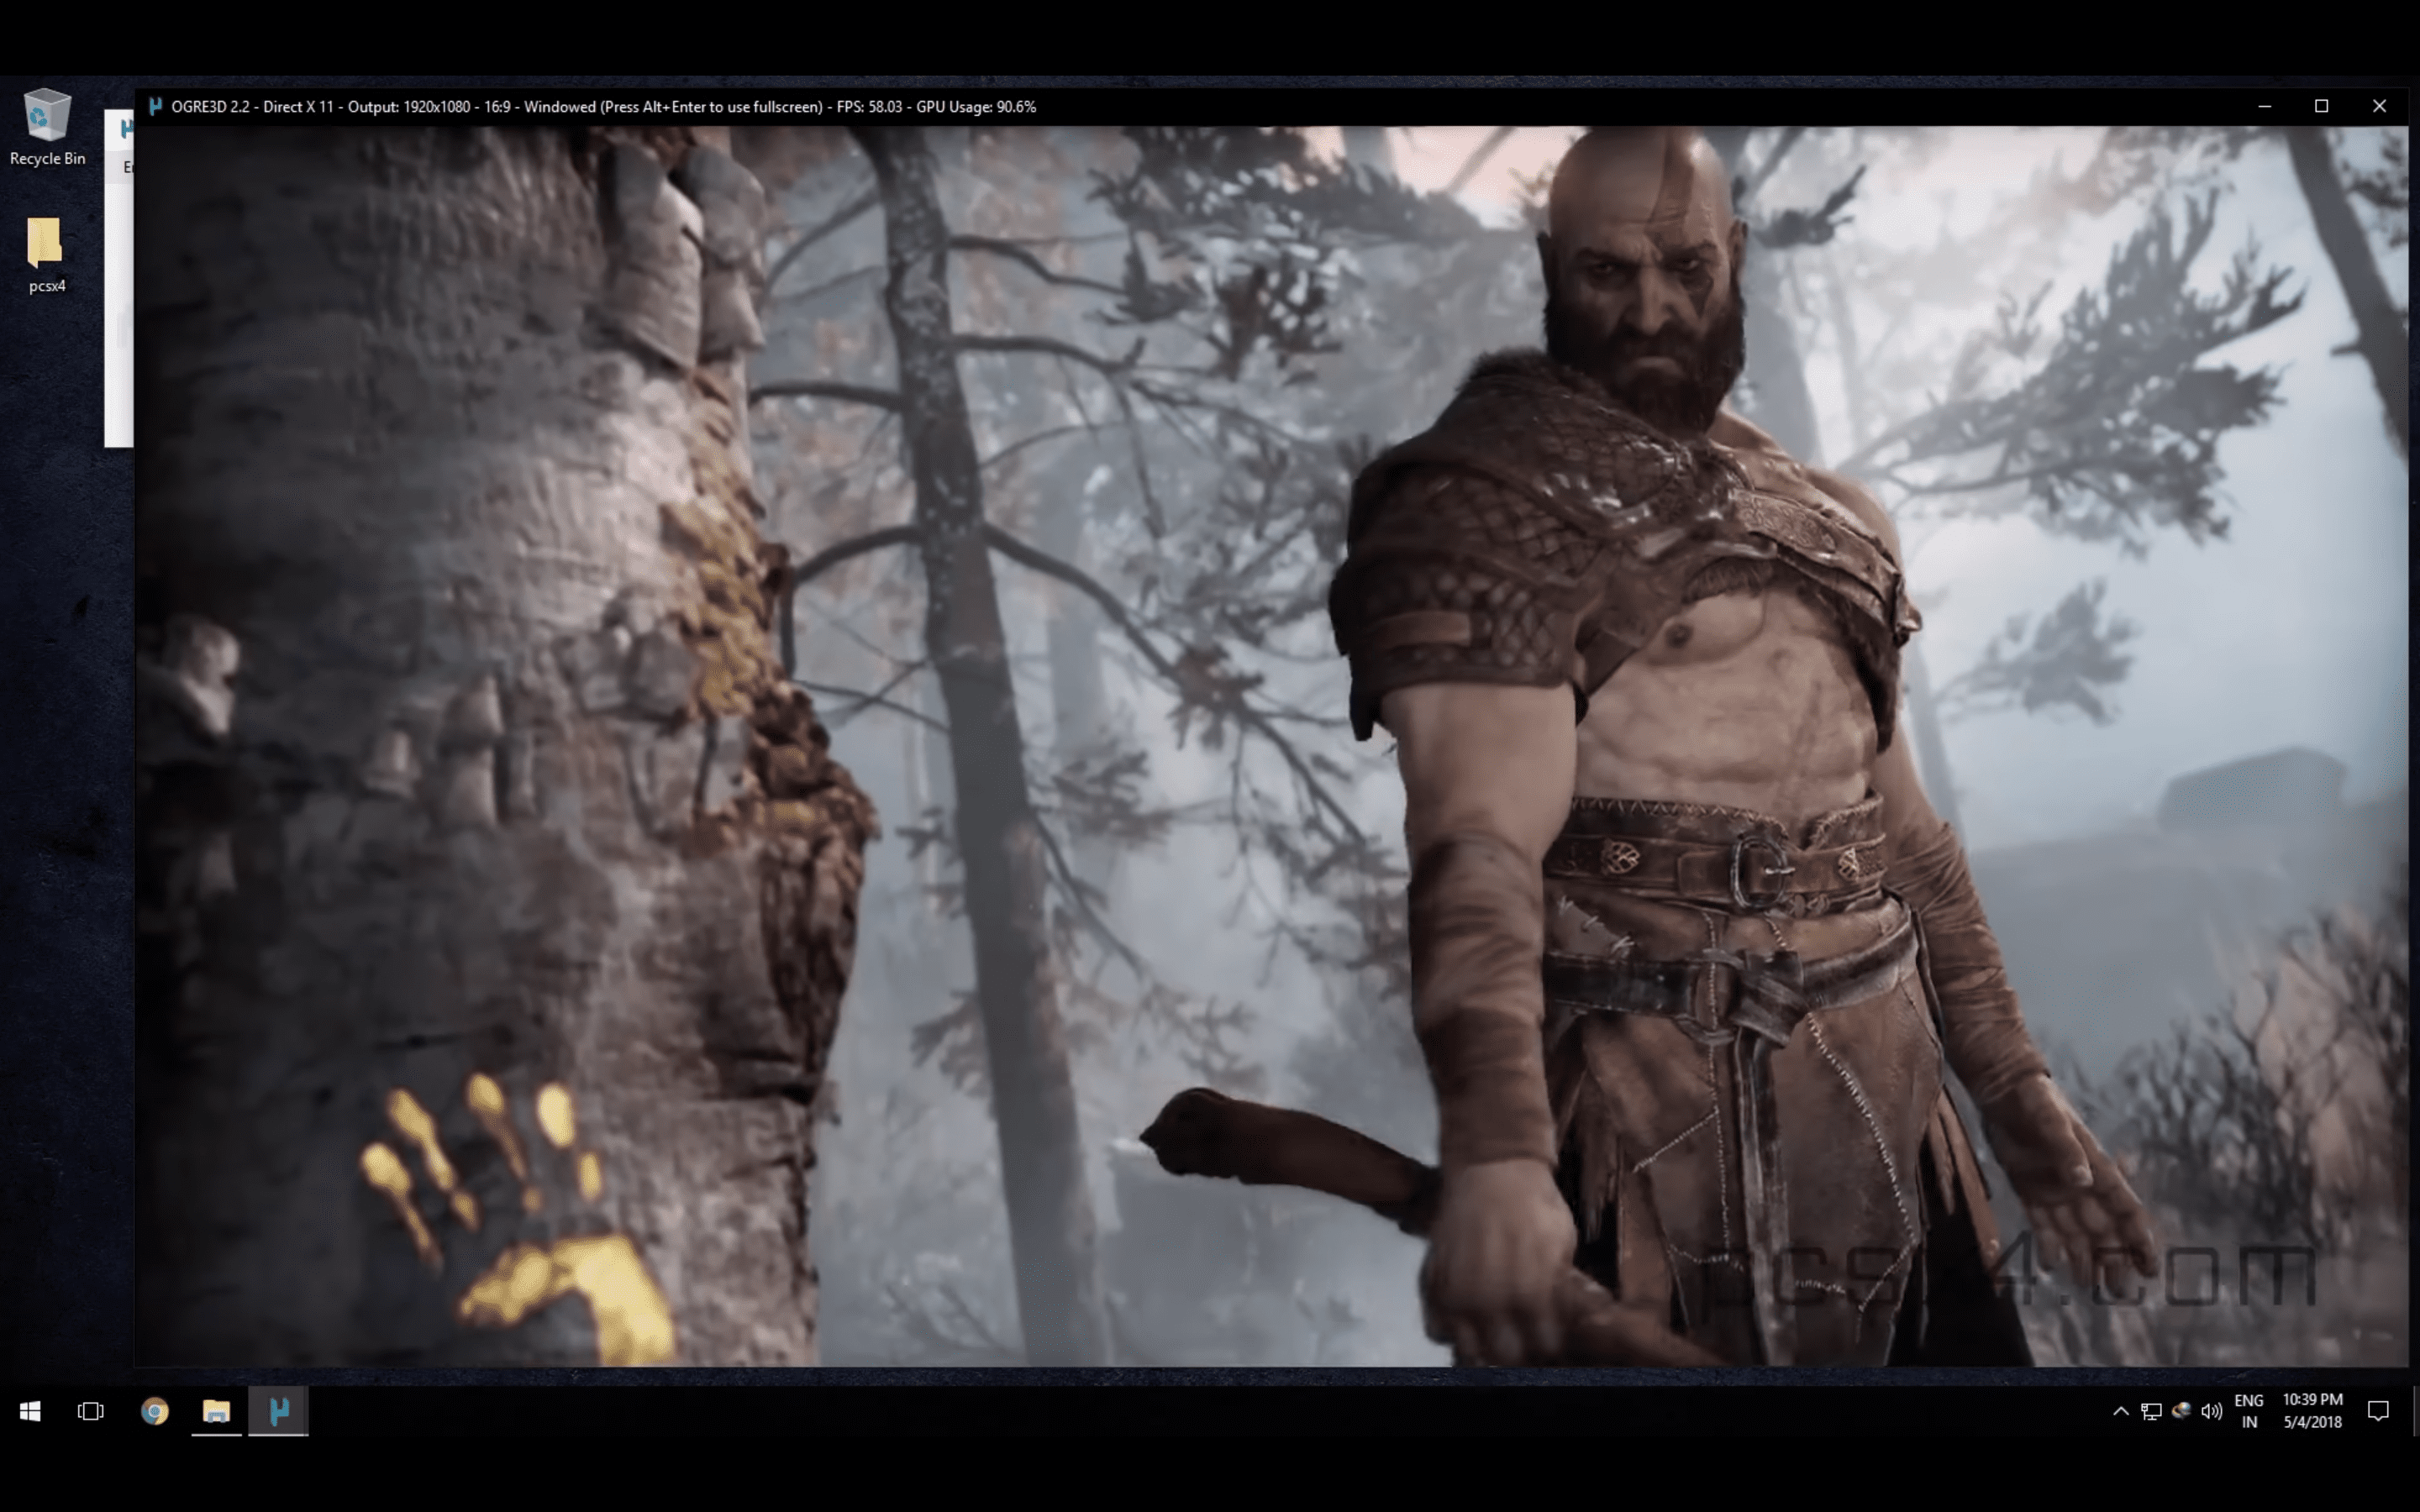 God Of War 4 On Pc Running Playstation 4 Emulator For Pc Fake Or Not